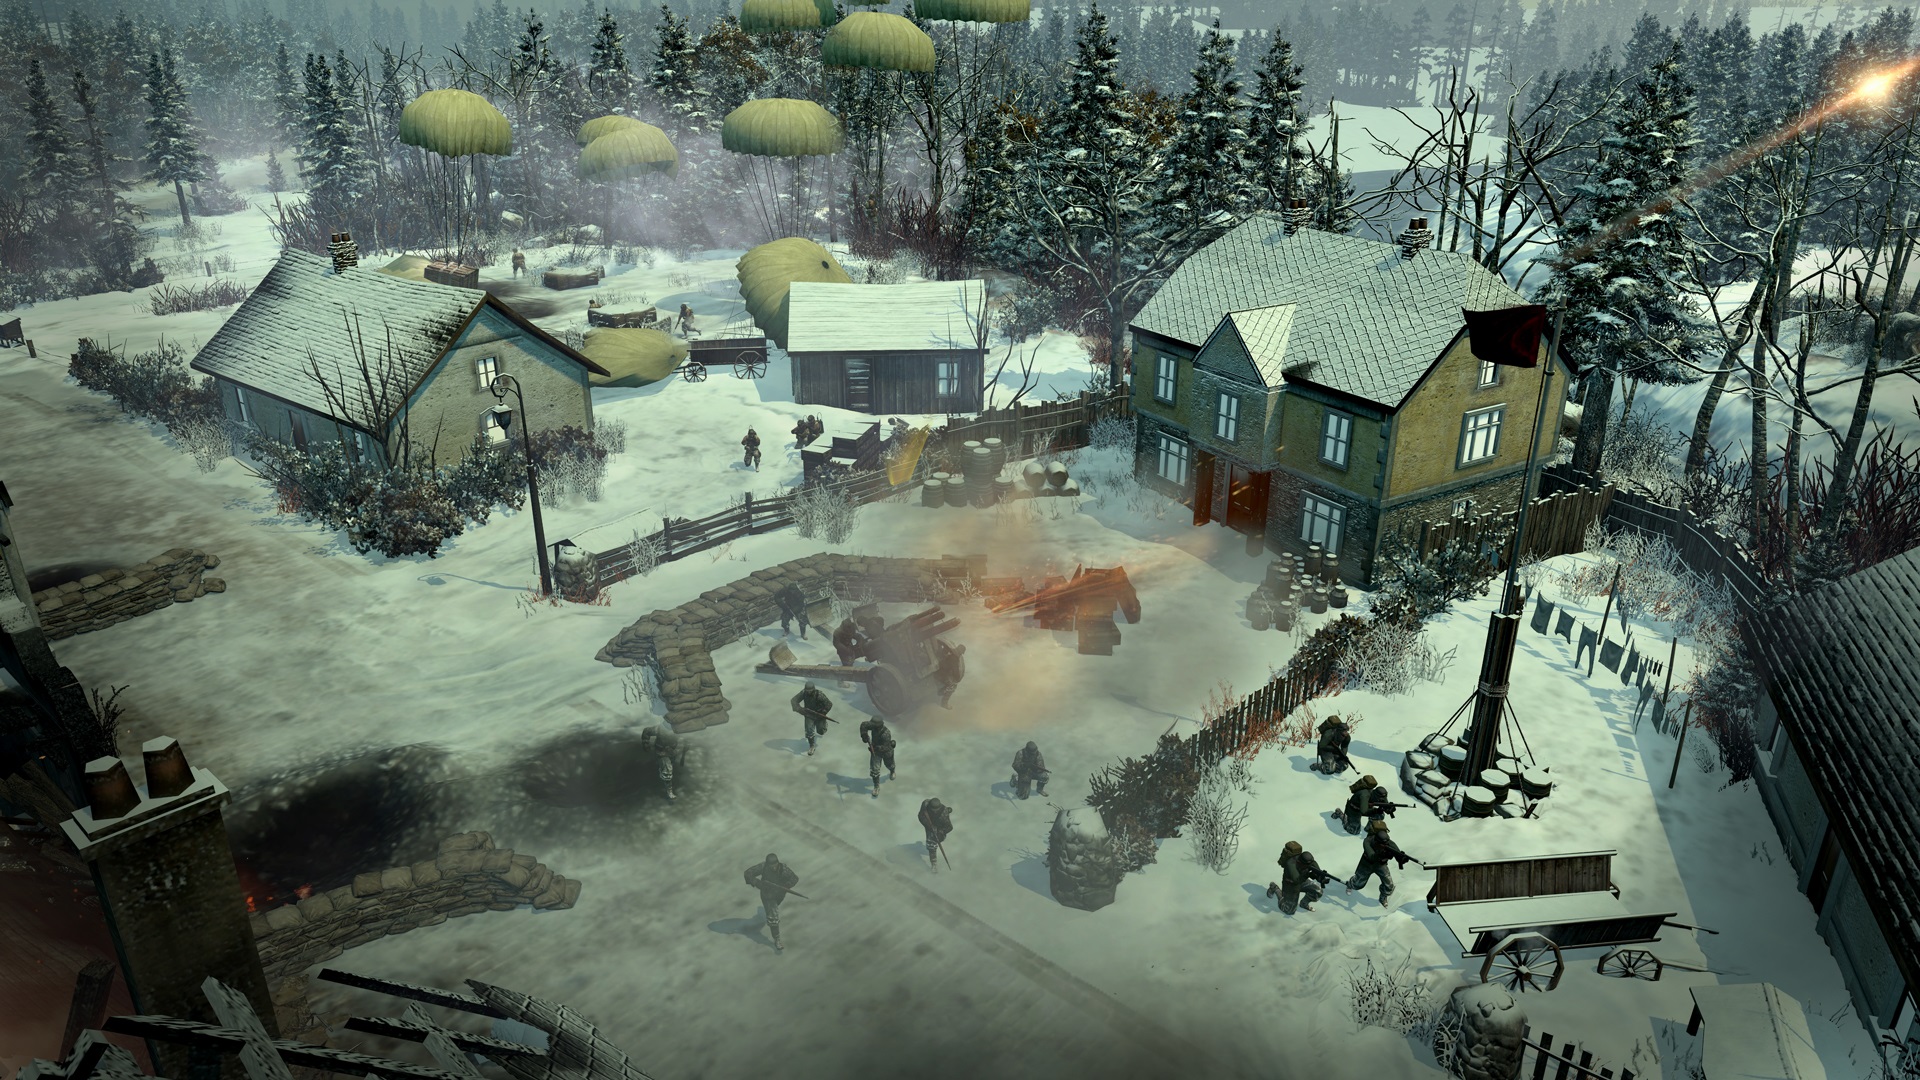 Best WW2 games: Company of Heroes 2: Ardennes Assault. Image shows soldiers running around in a snowy village.